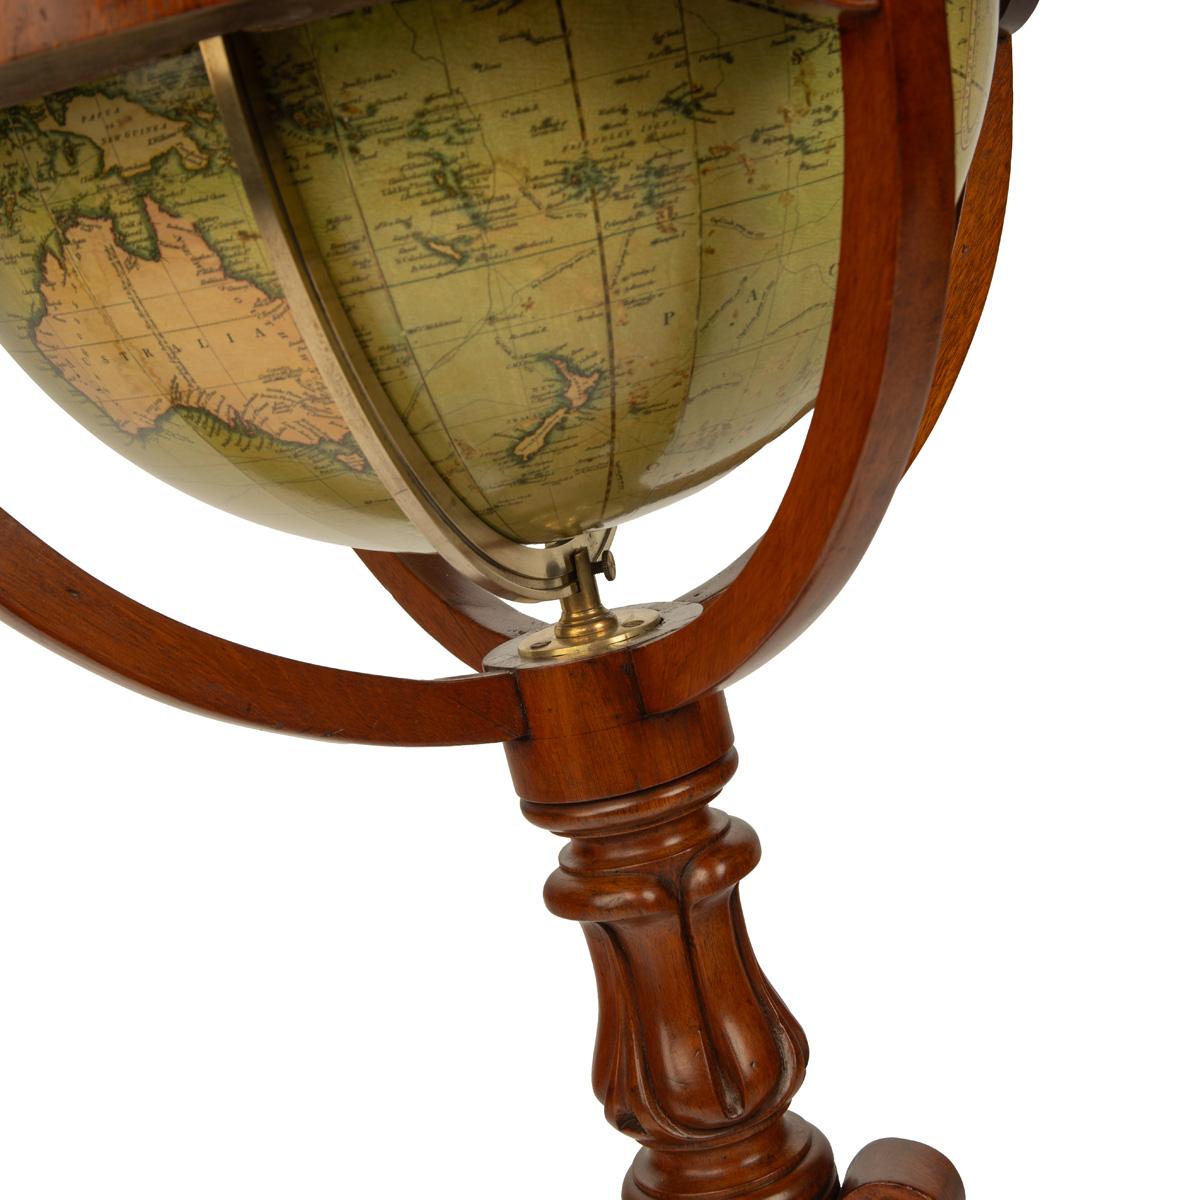 Mahogany A Cary’s 15 inch terrestrial globe 1849 For Sale